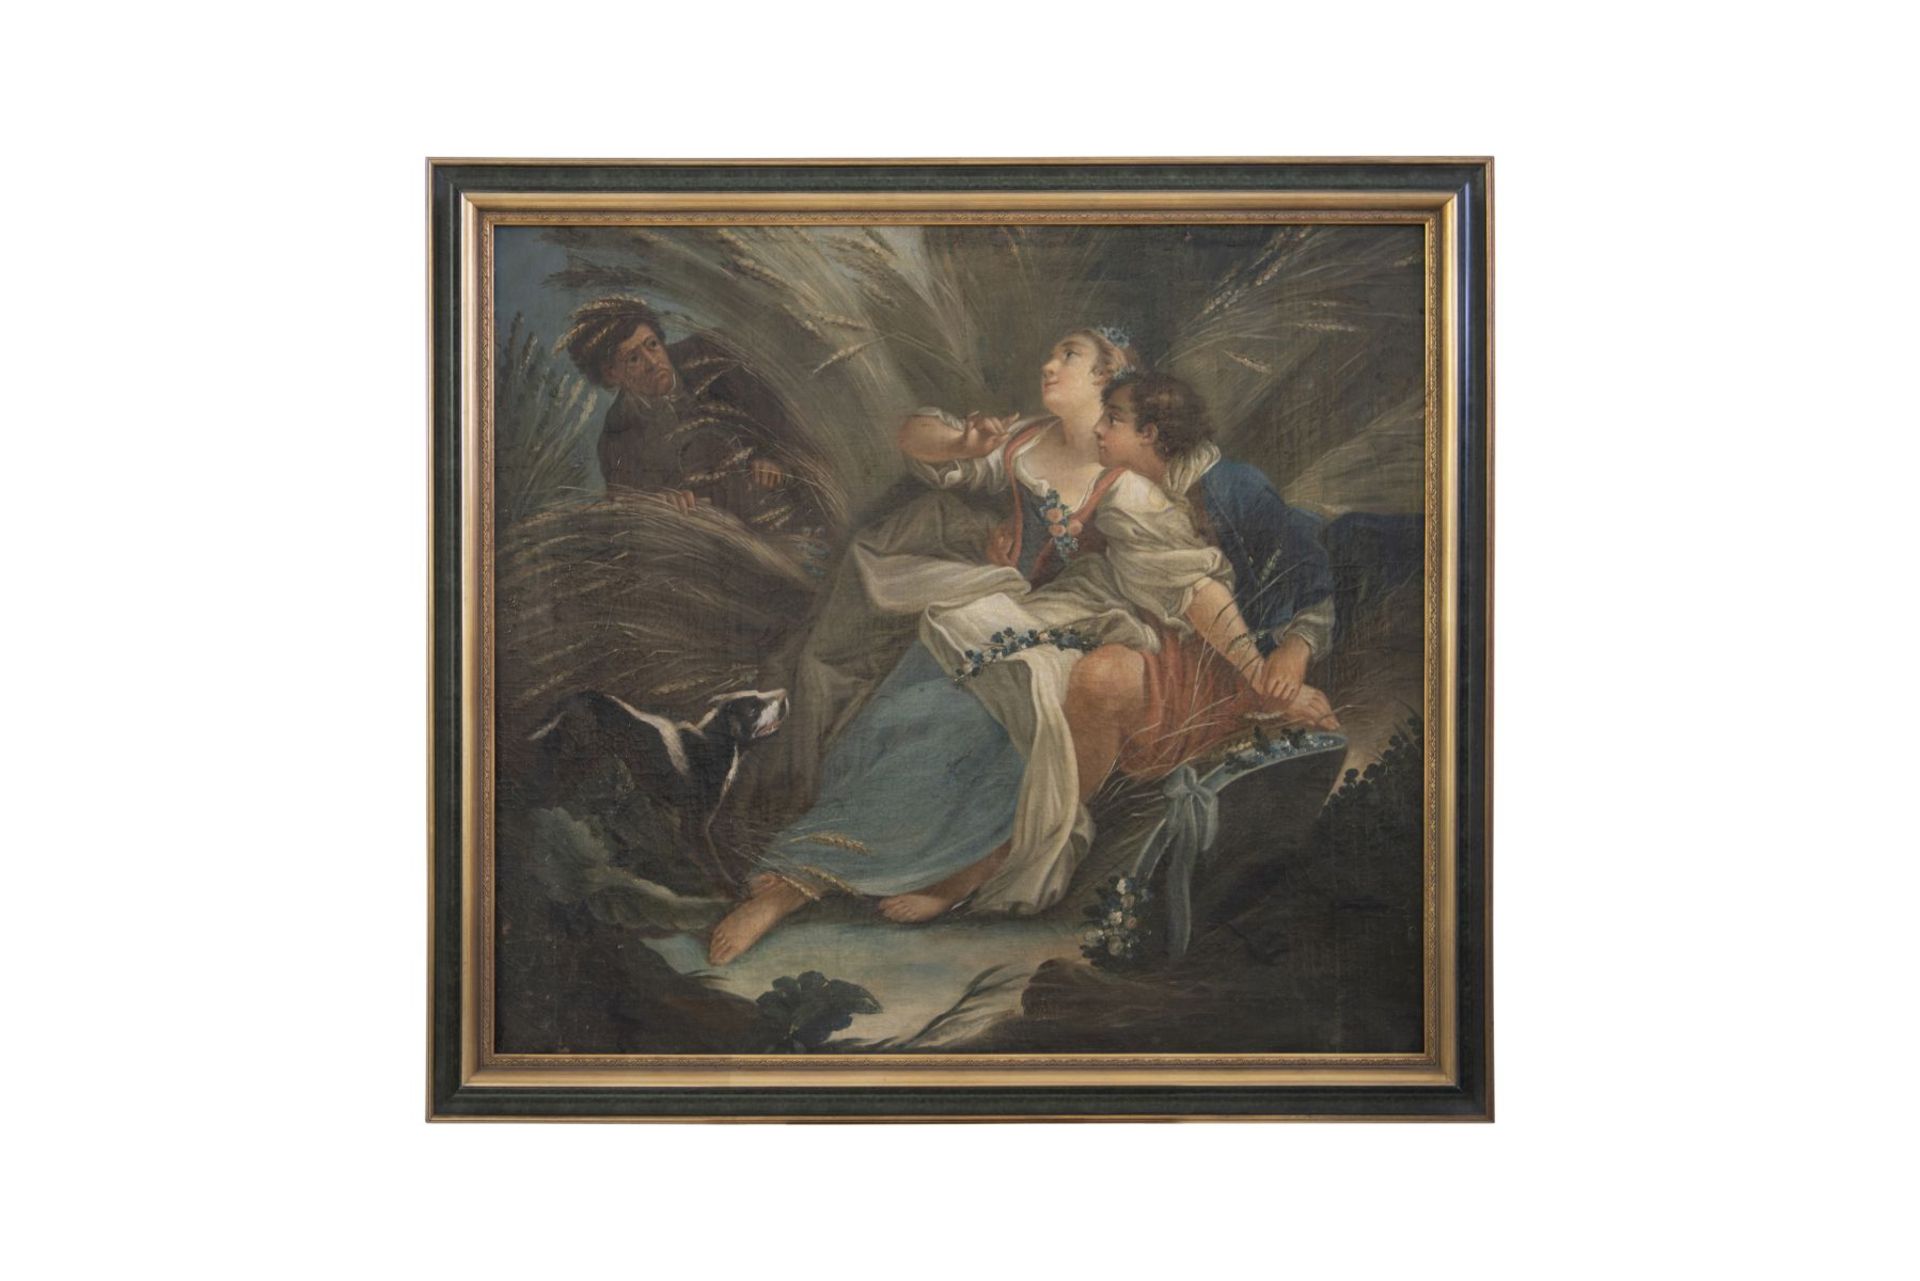 France 18th century "Caught lovers"